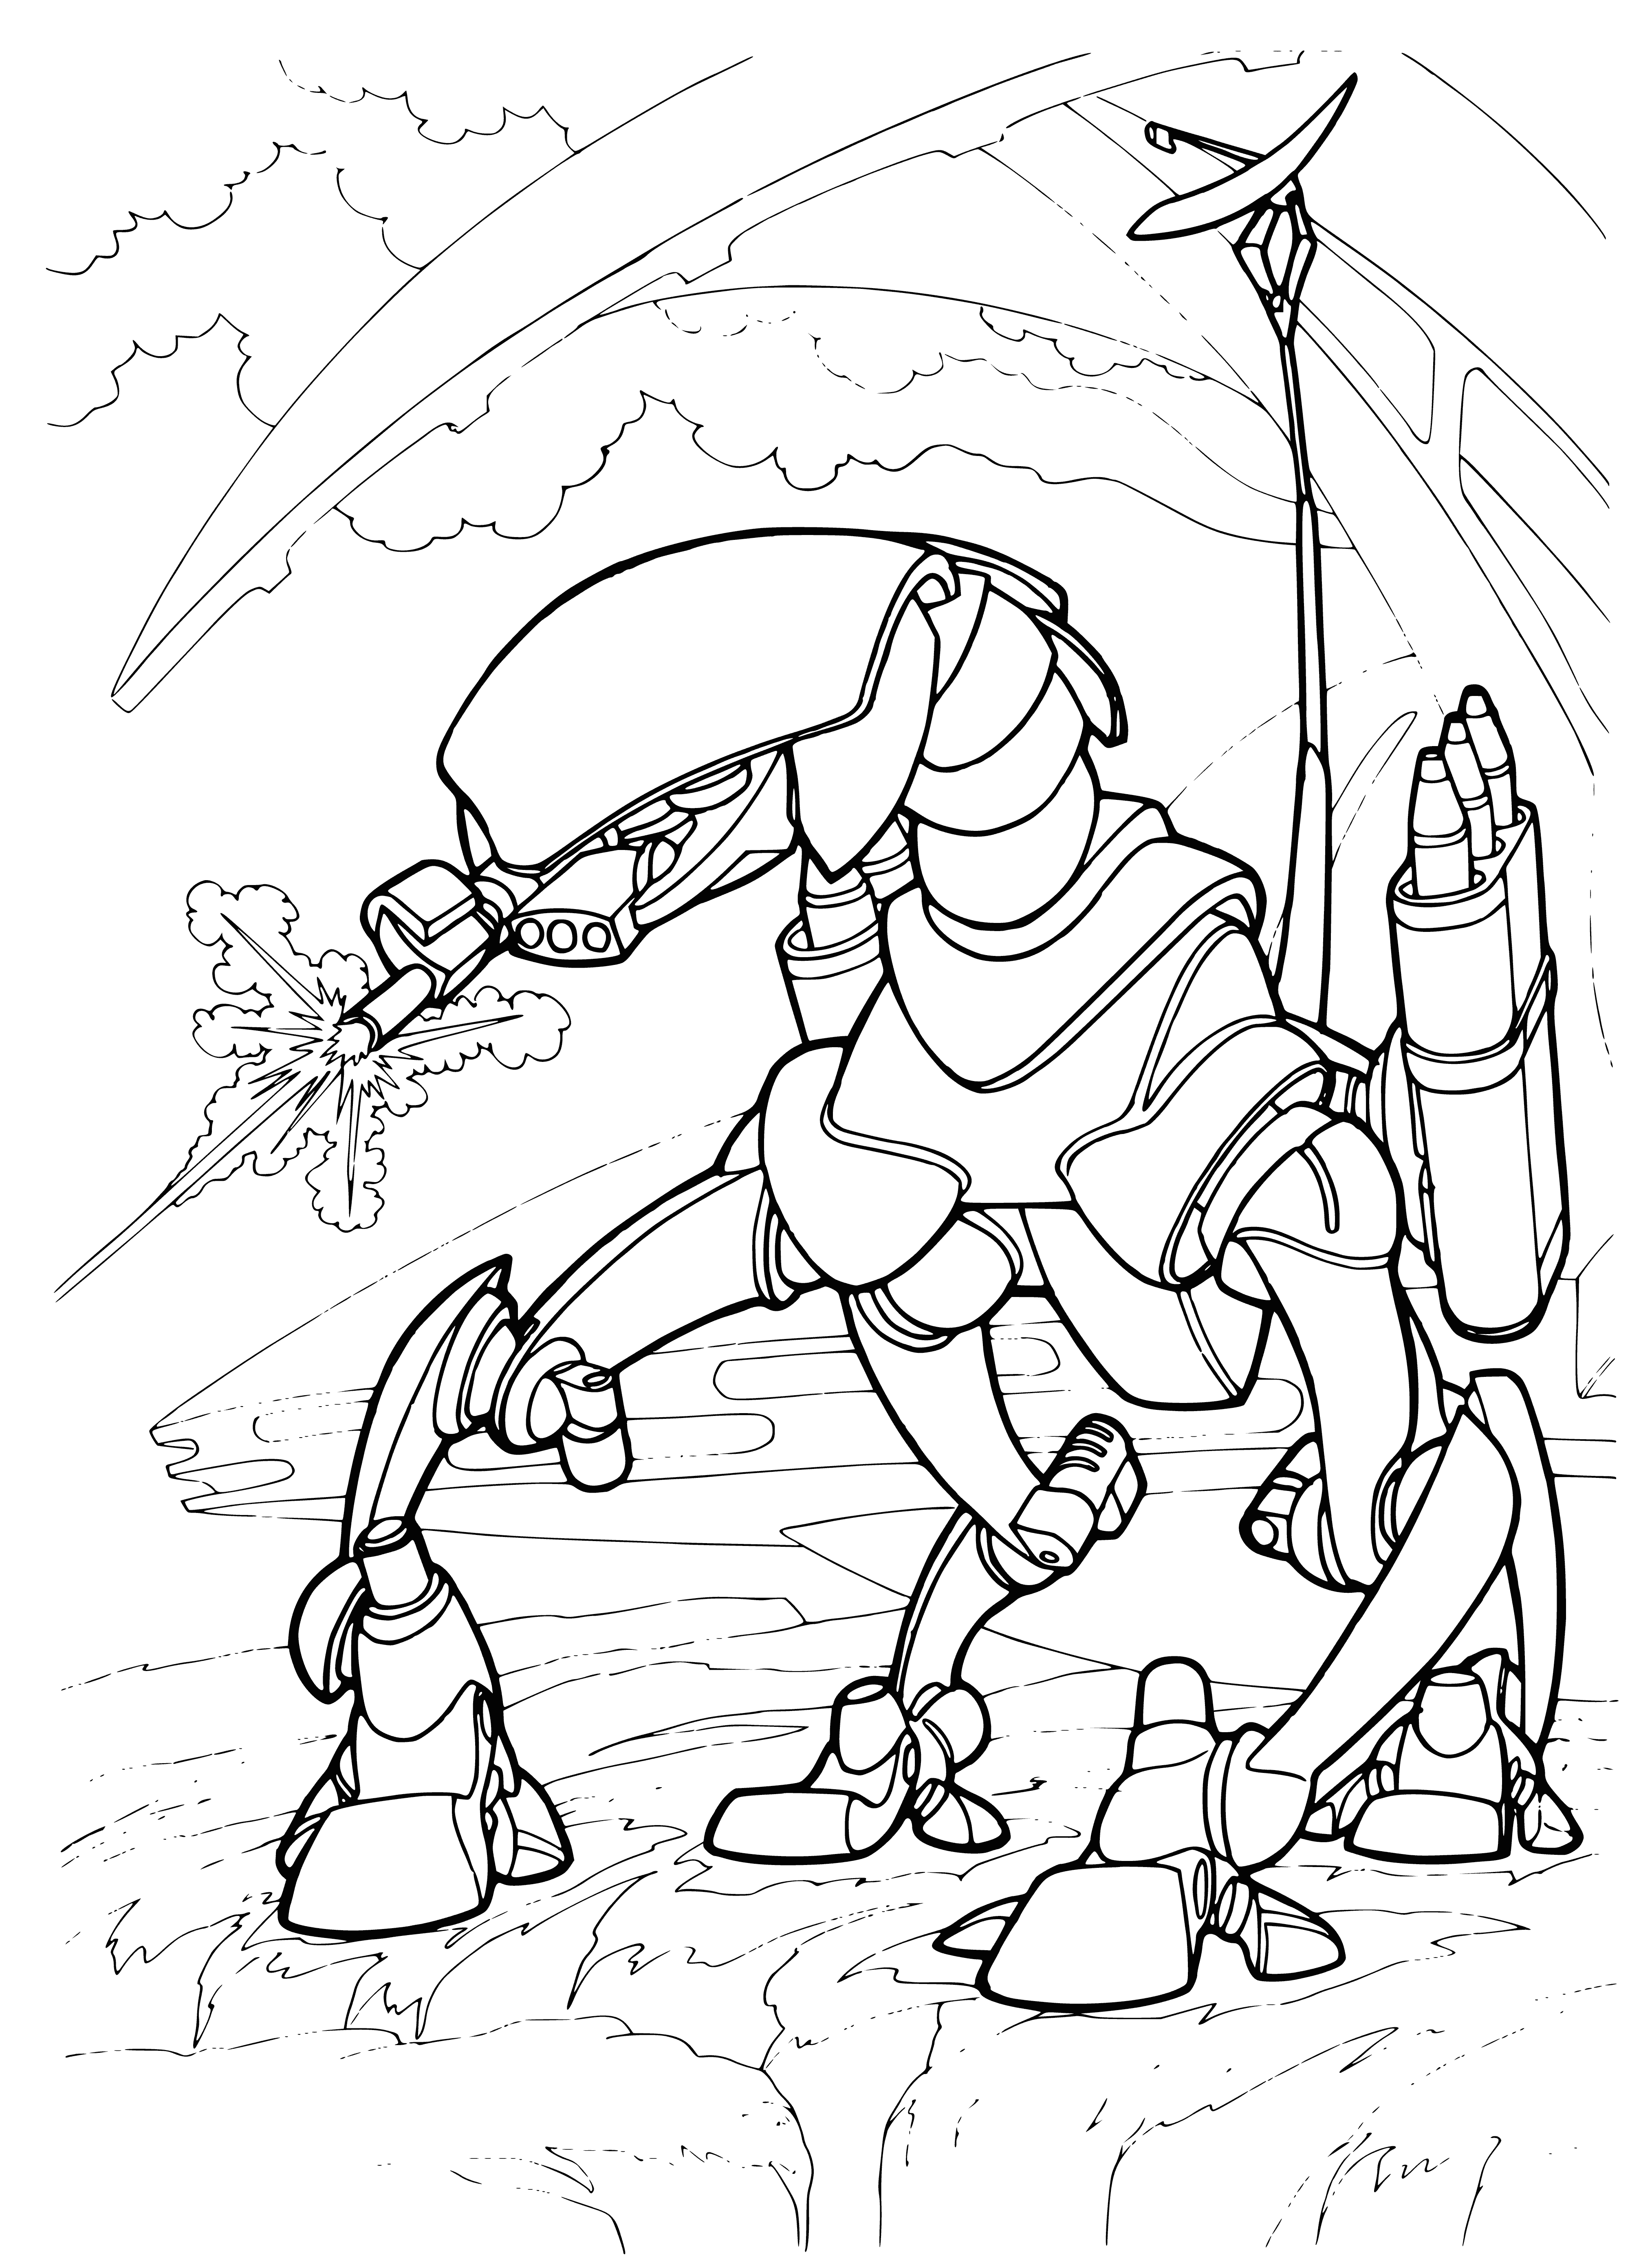 coloring page: Cyborgs battle for ultimate victory, no mercy shown as weaponry is used without limit in a violent, future world.